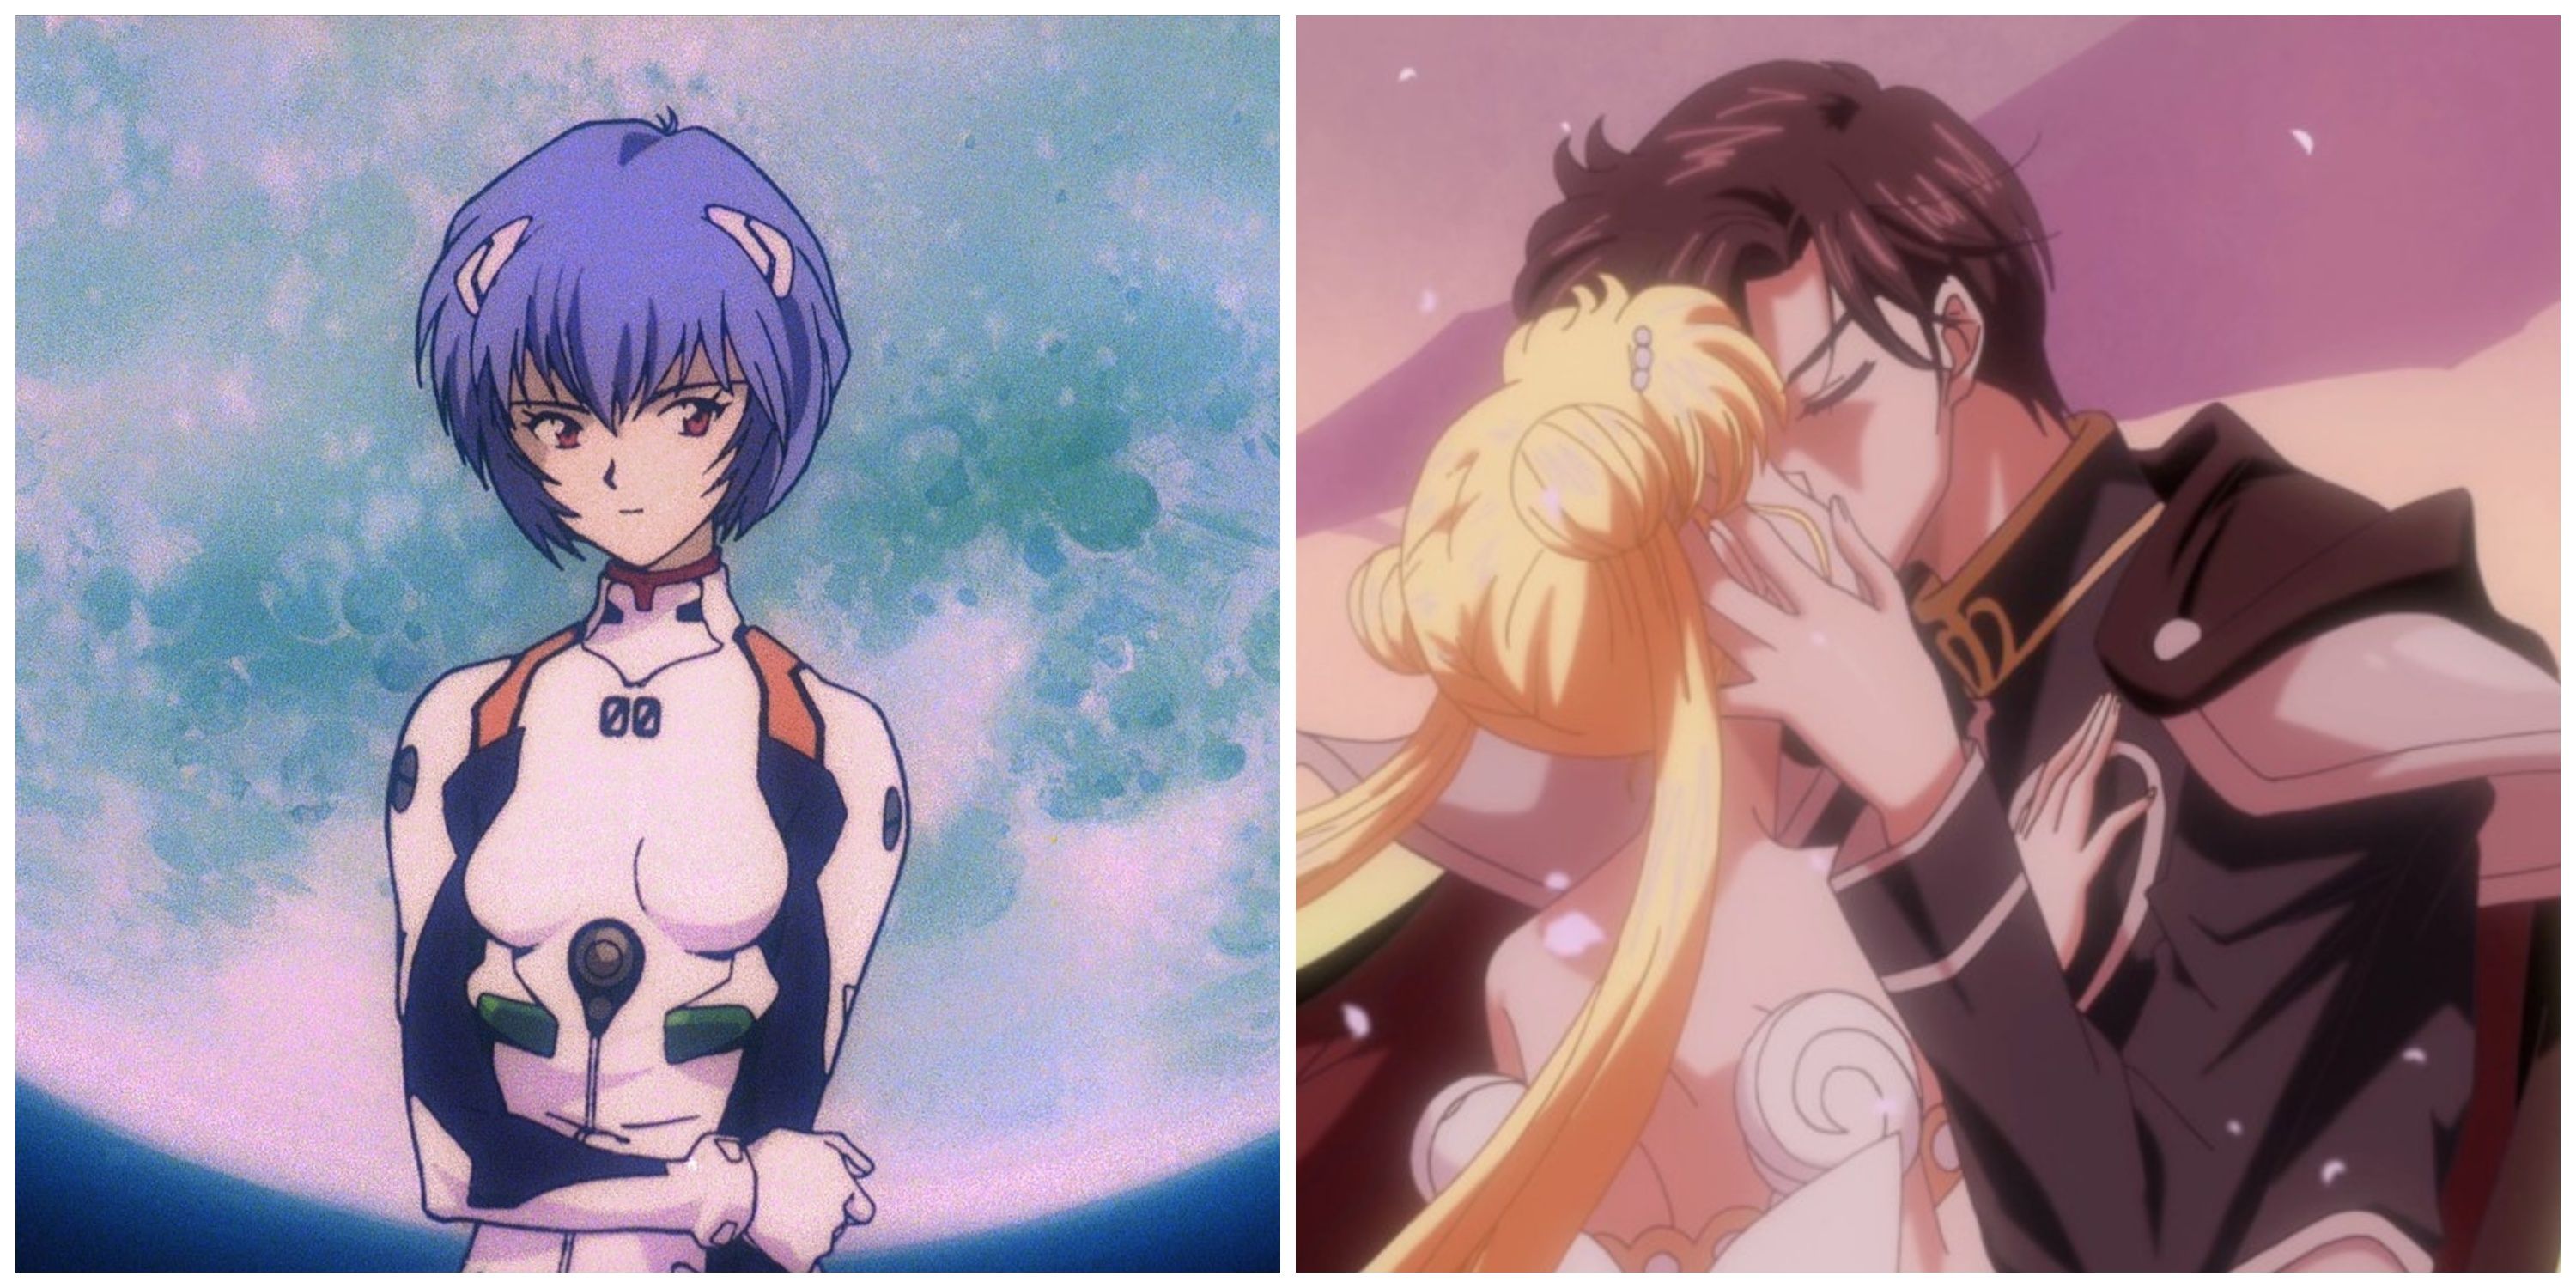 Rei with her arms crossed - Neon Genesis Evangelion, Serenity and Endymion hug in Sailor Moon.